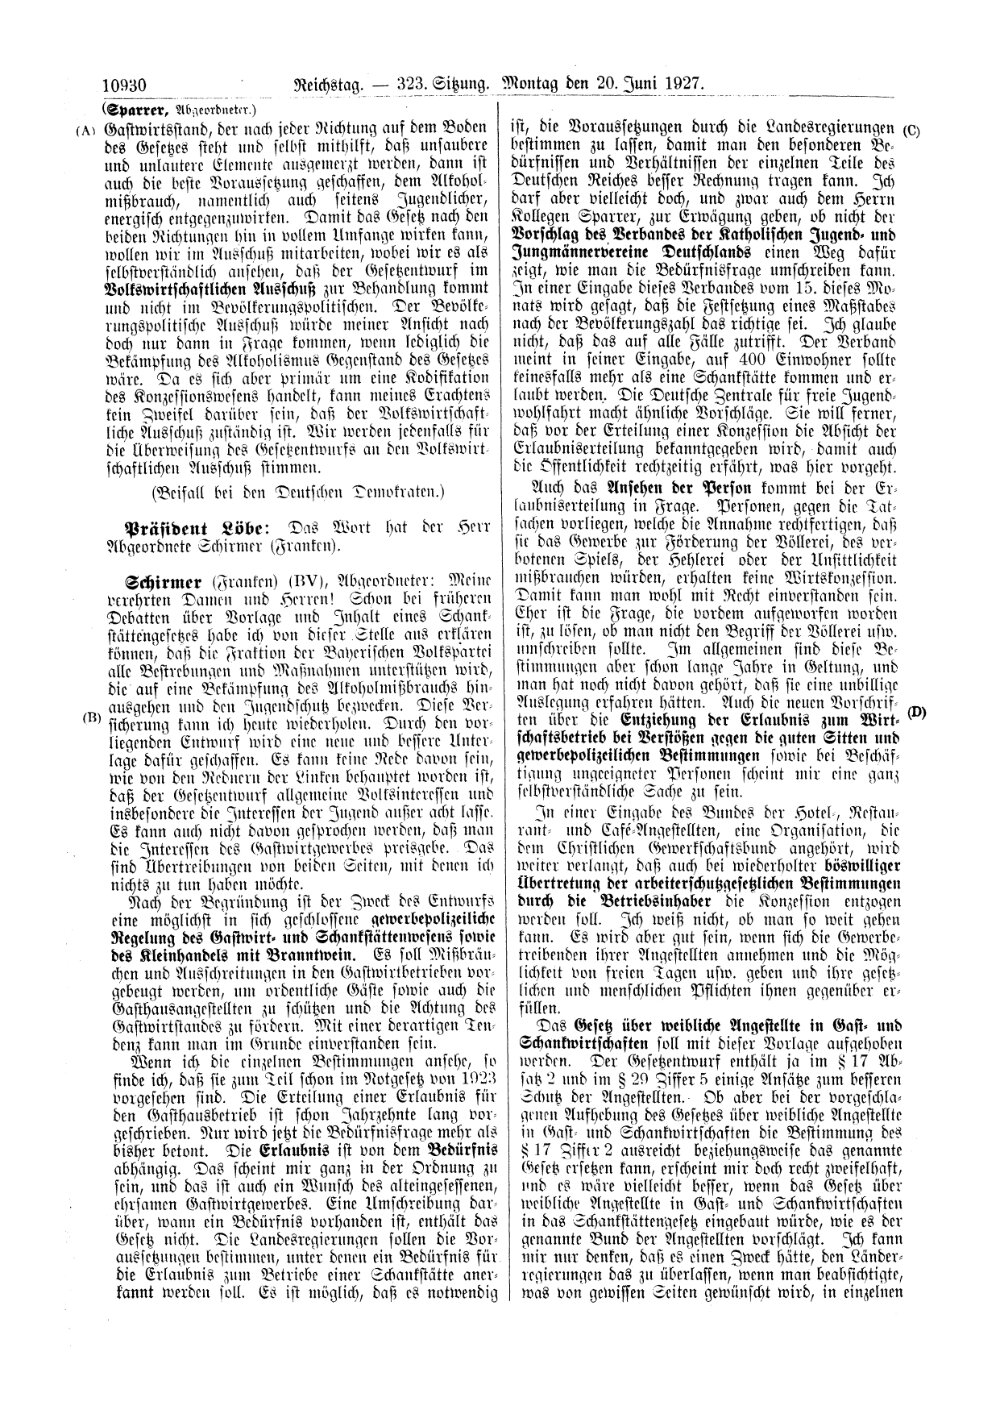 Scan of page 10930